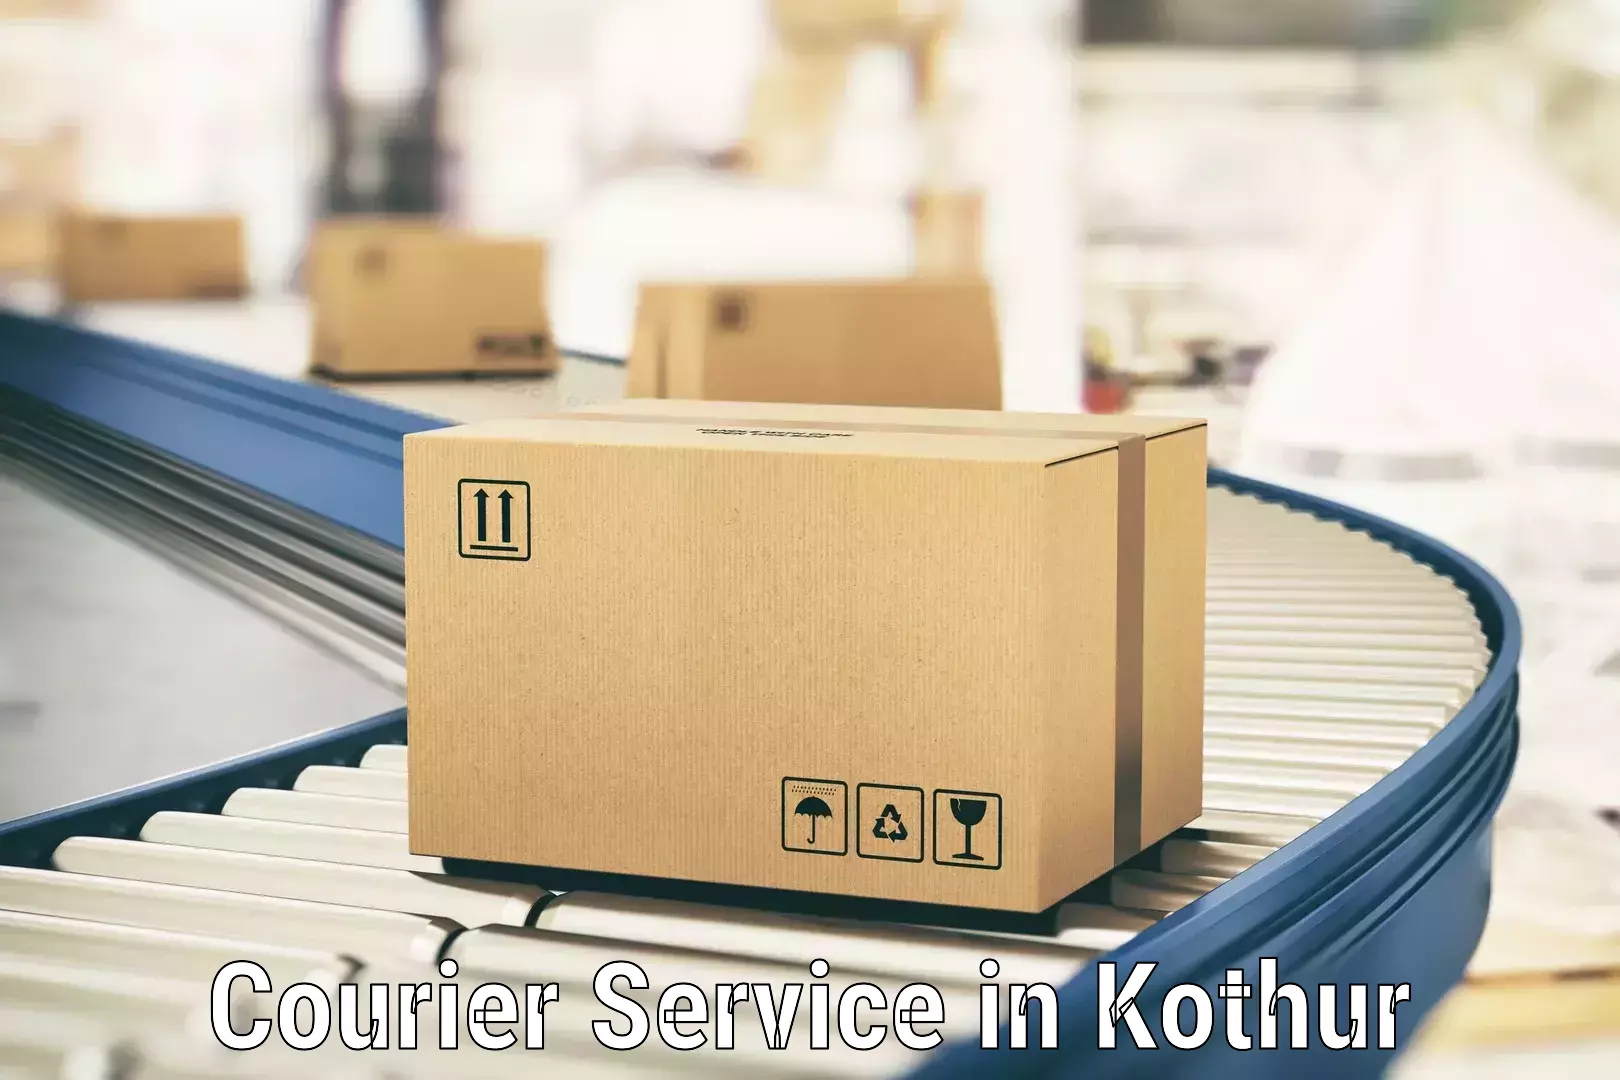 Courier service booking in Kothur